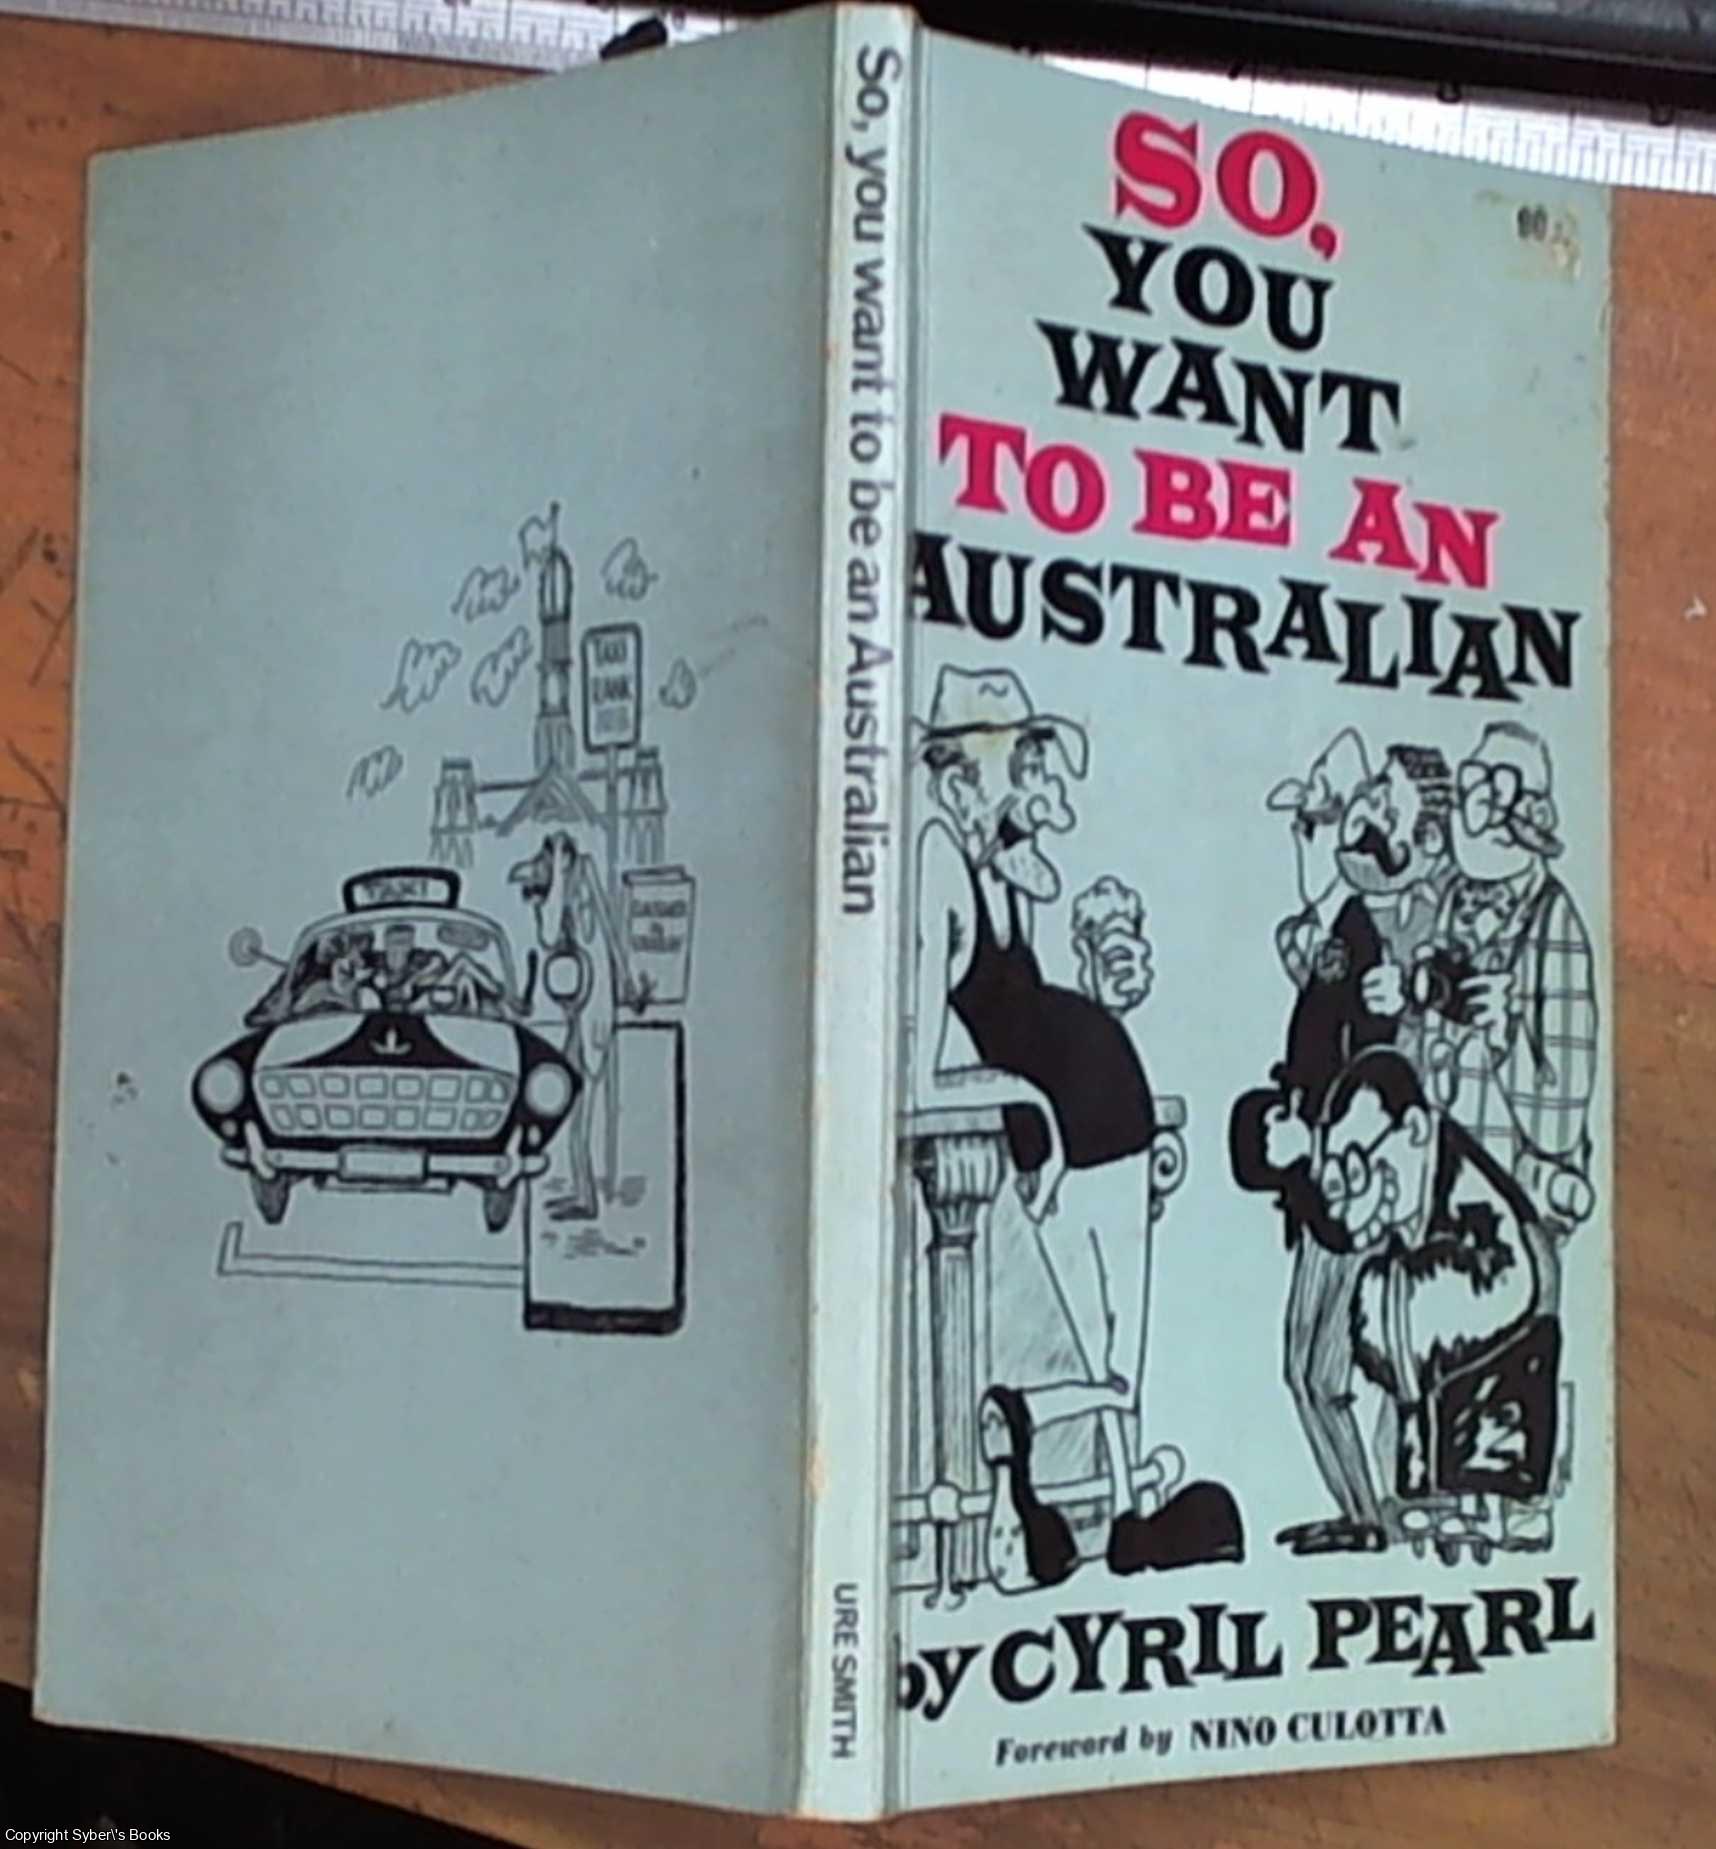 Pearl, Cyril - So You Want to be an Australian